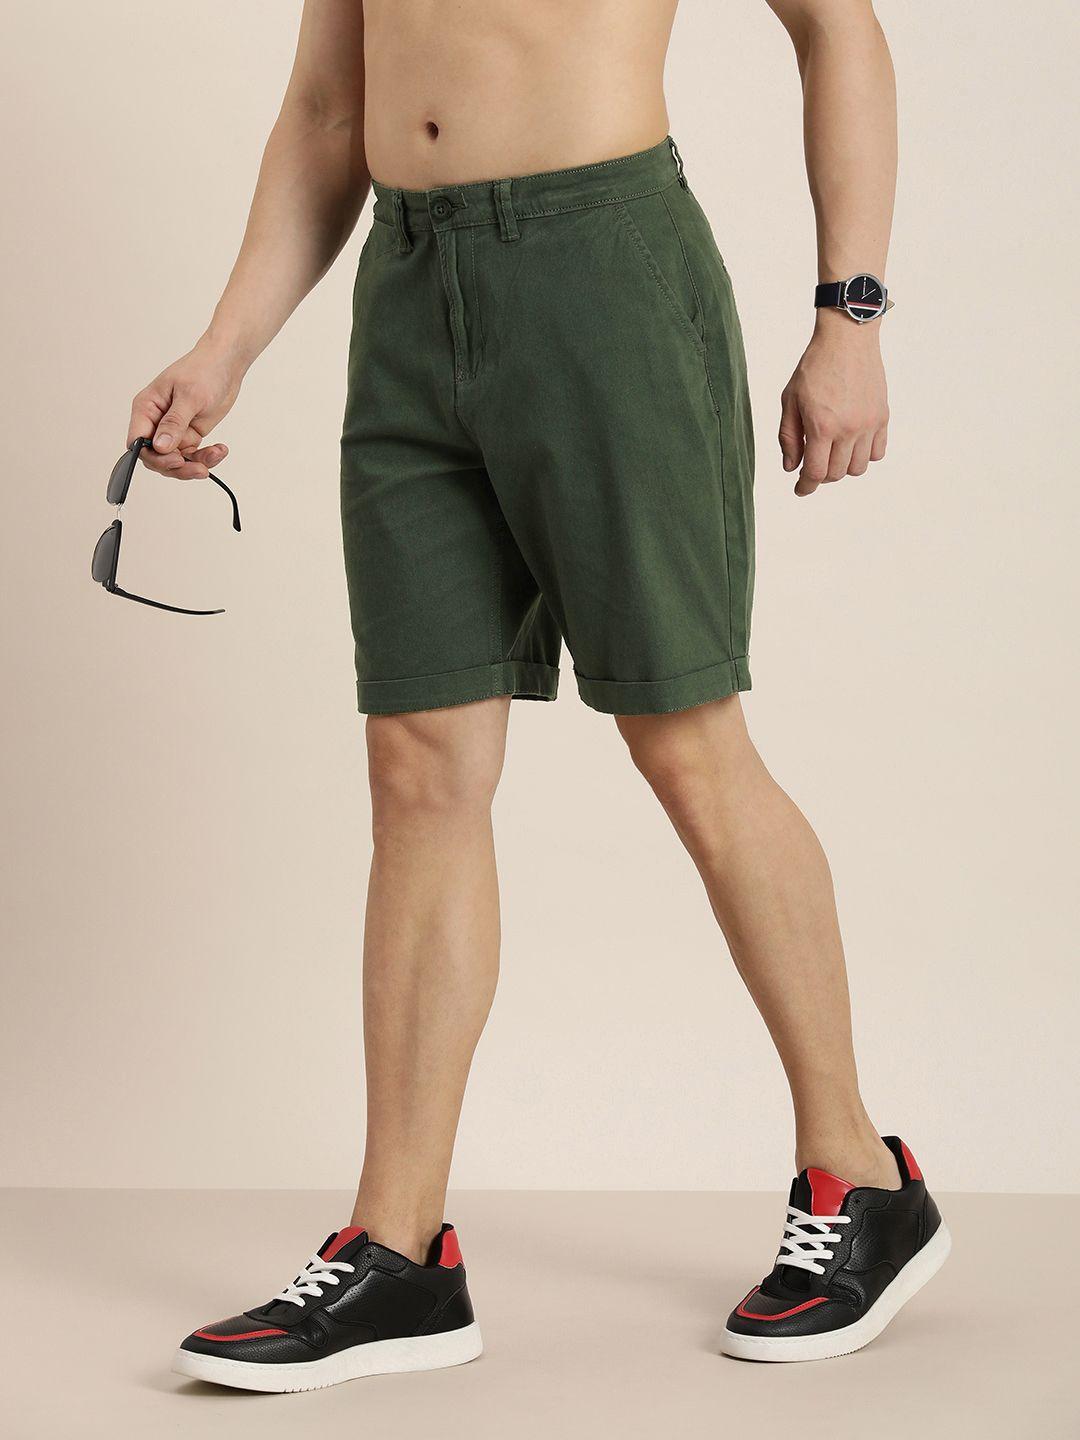 here&now men solid outdoor rapid-dry chino shorts